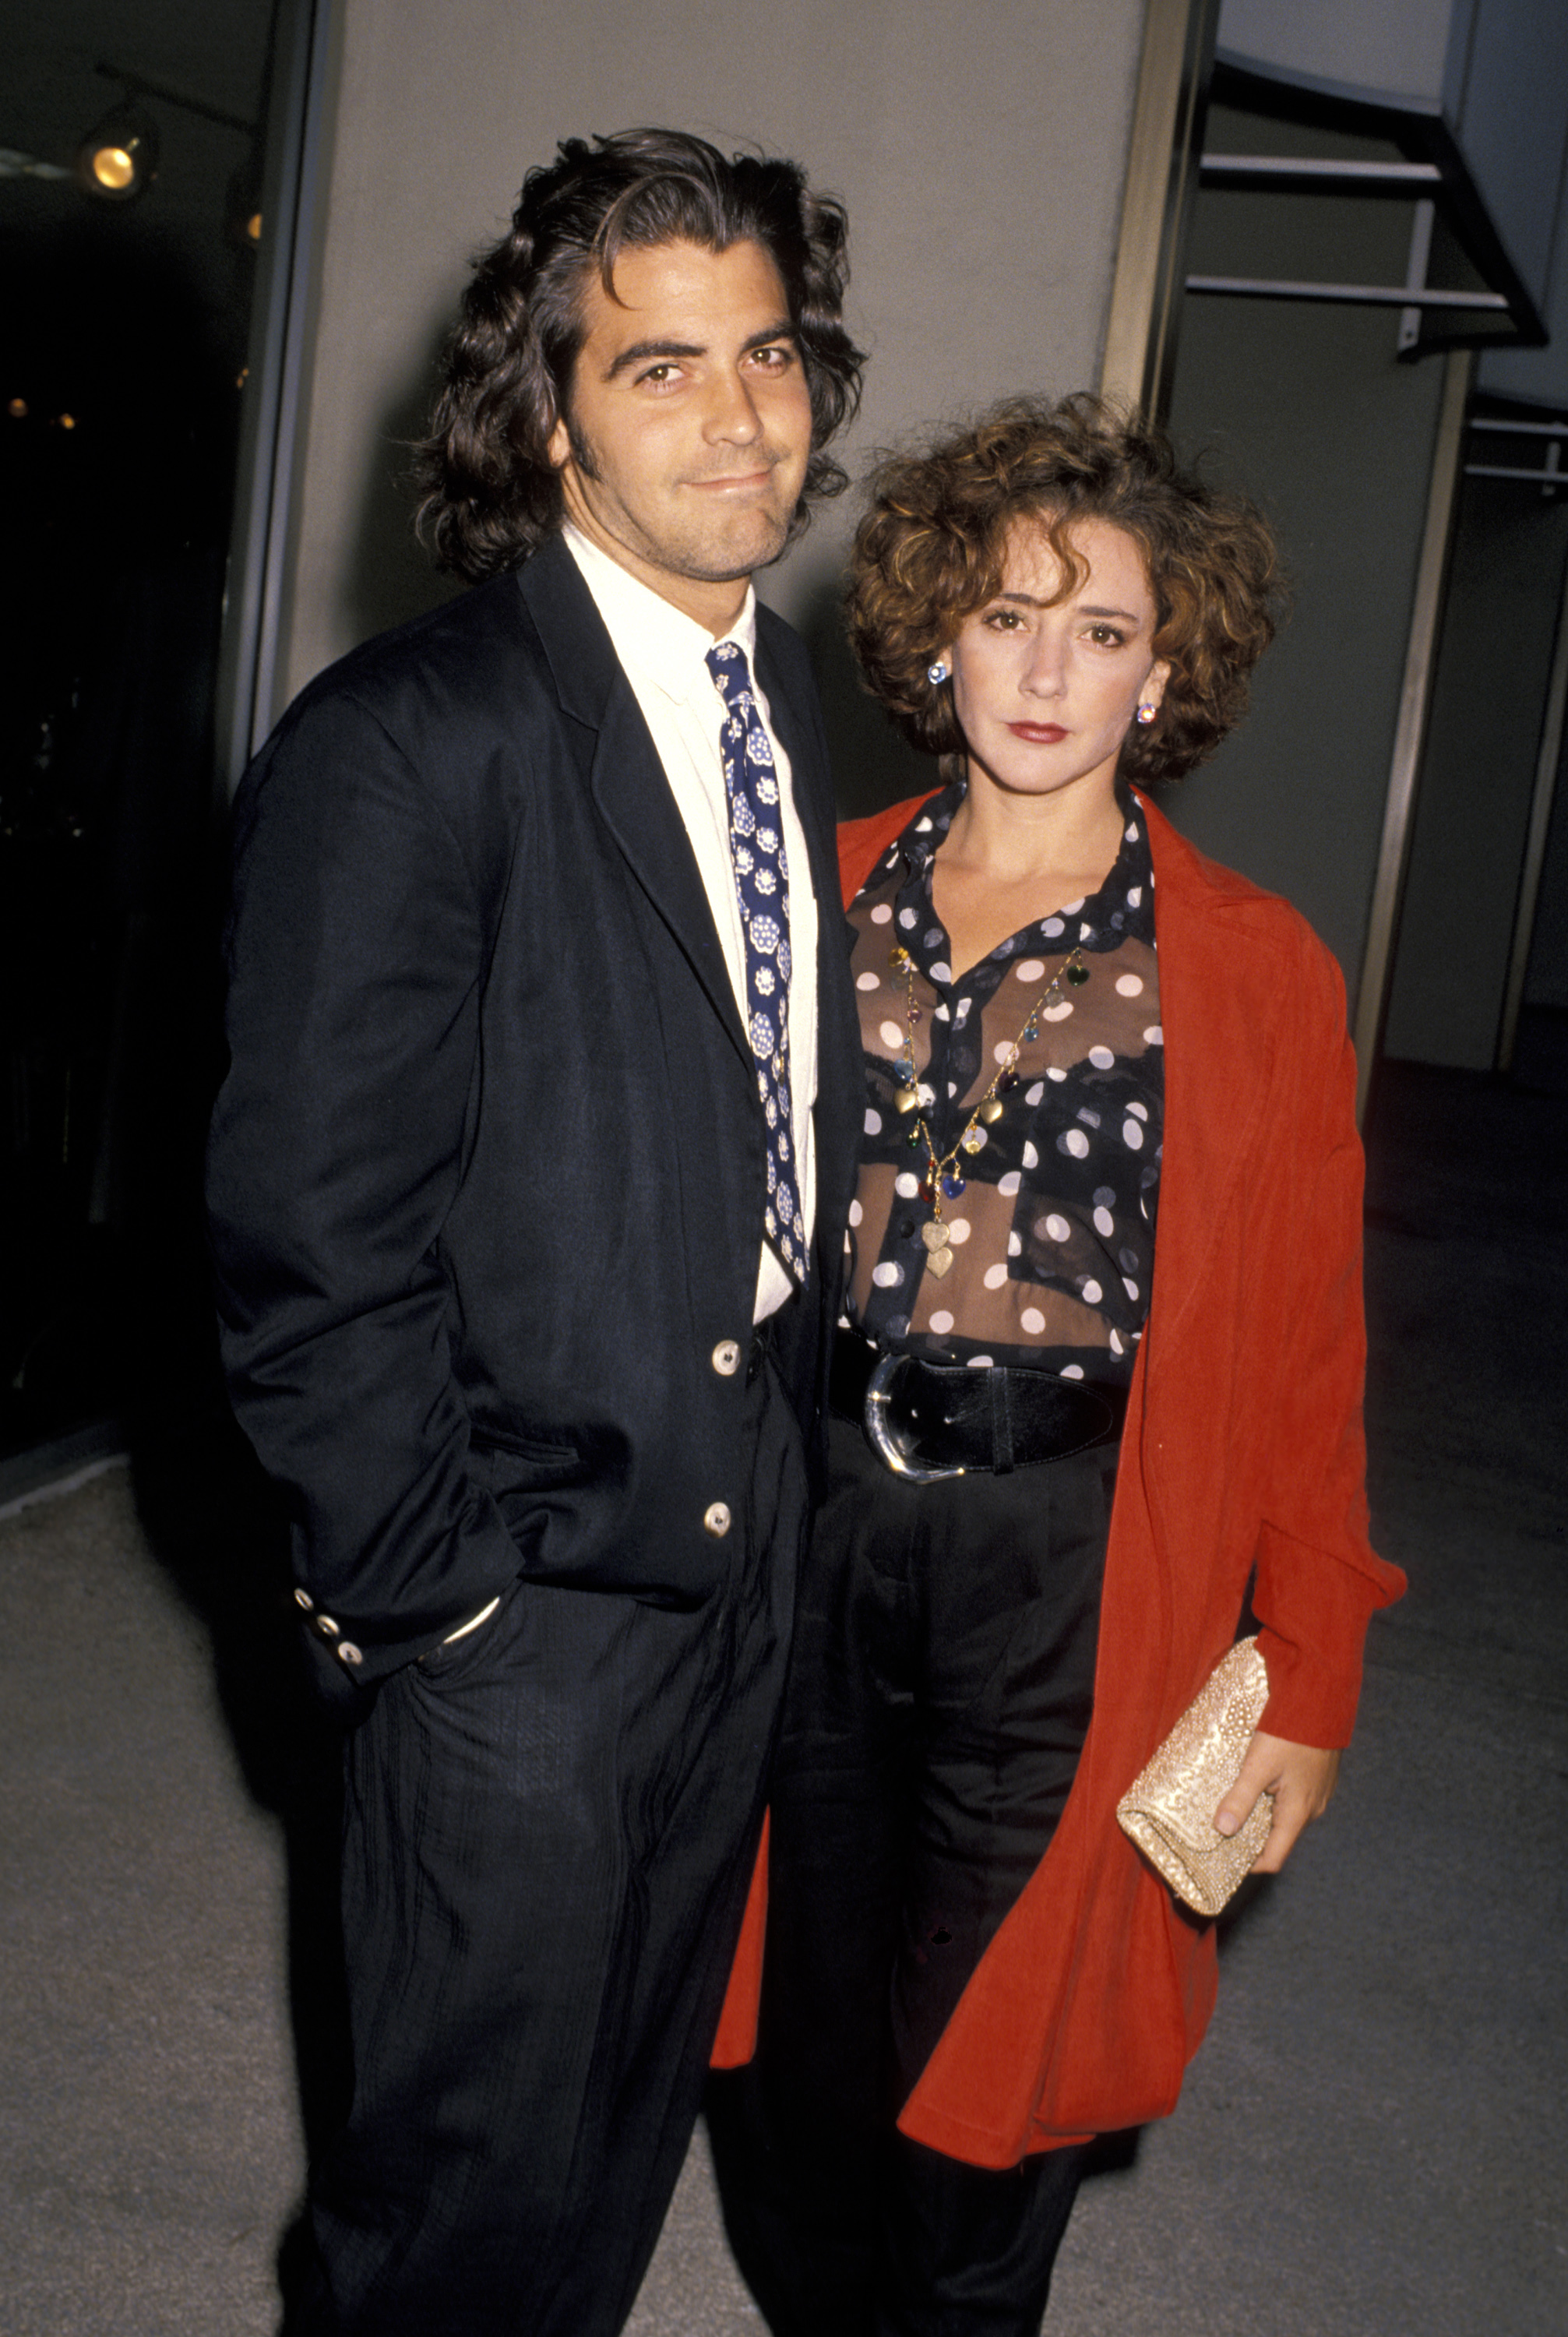 George Clooney and Talia Balsam at the ABC Television Affiliates Party in Los Angeles, California on June 14, 1990 | Source: Getty Images